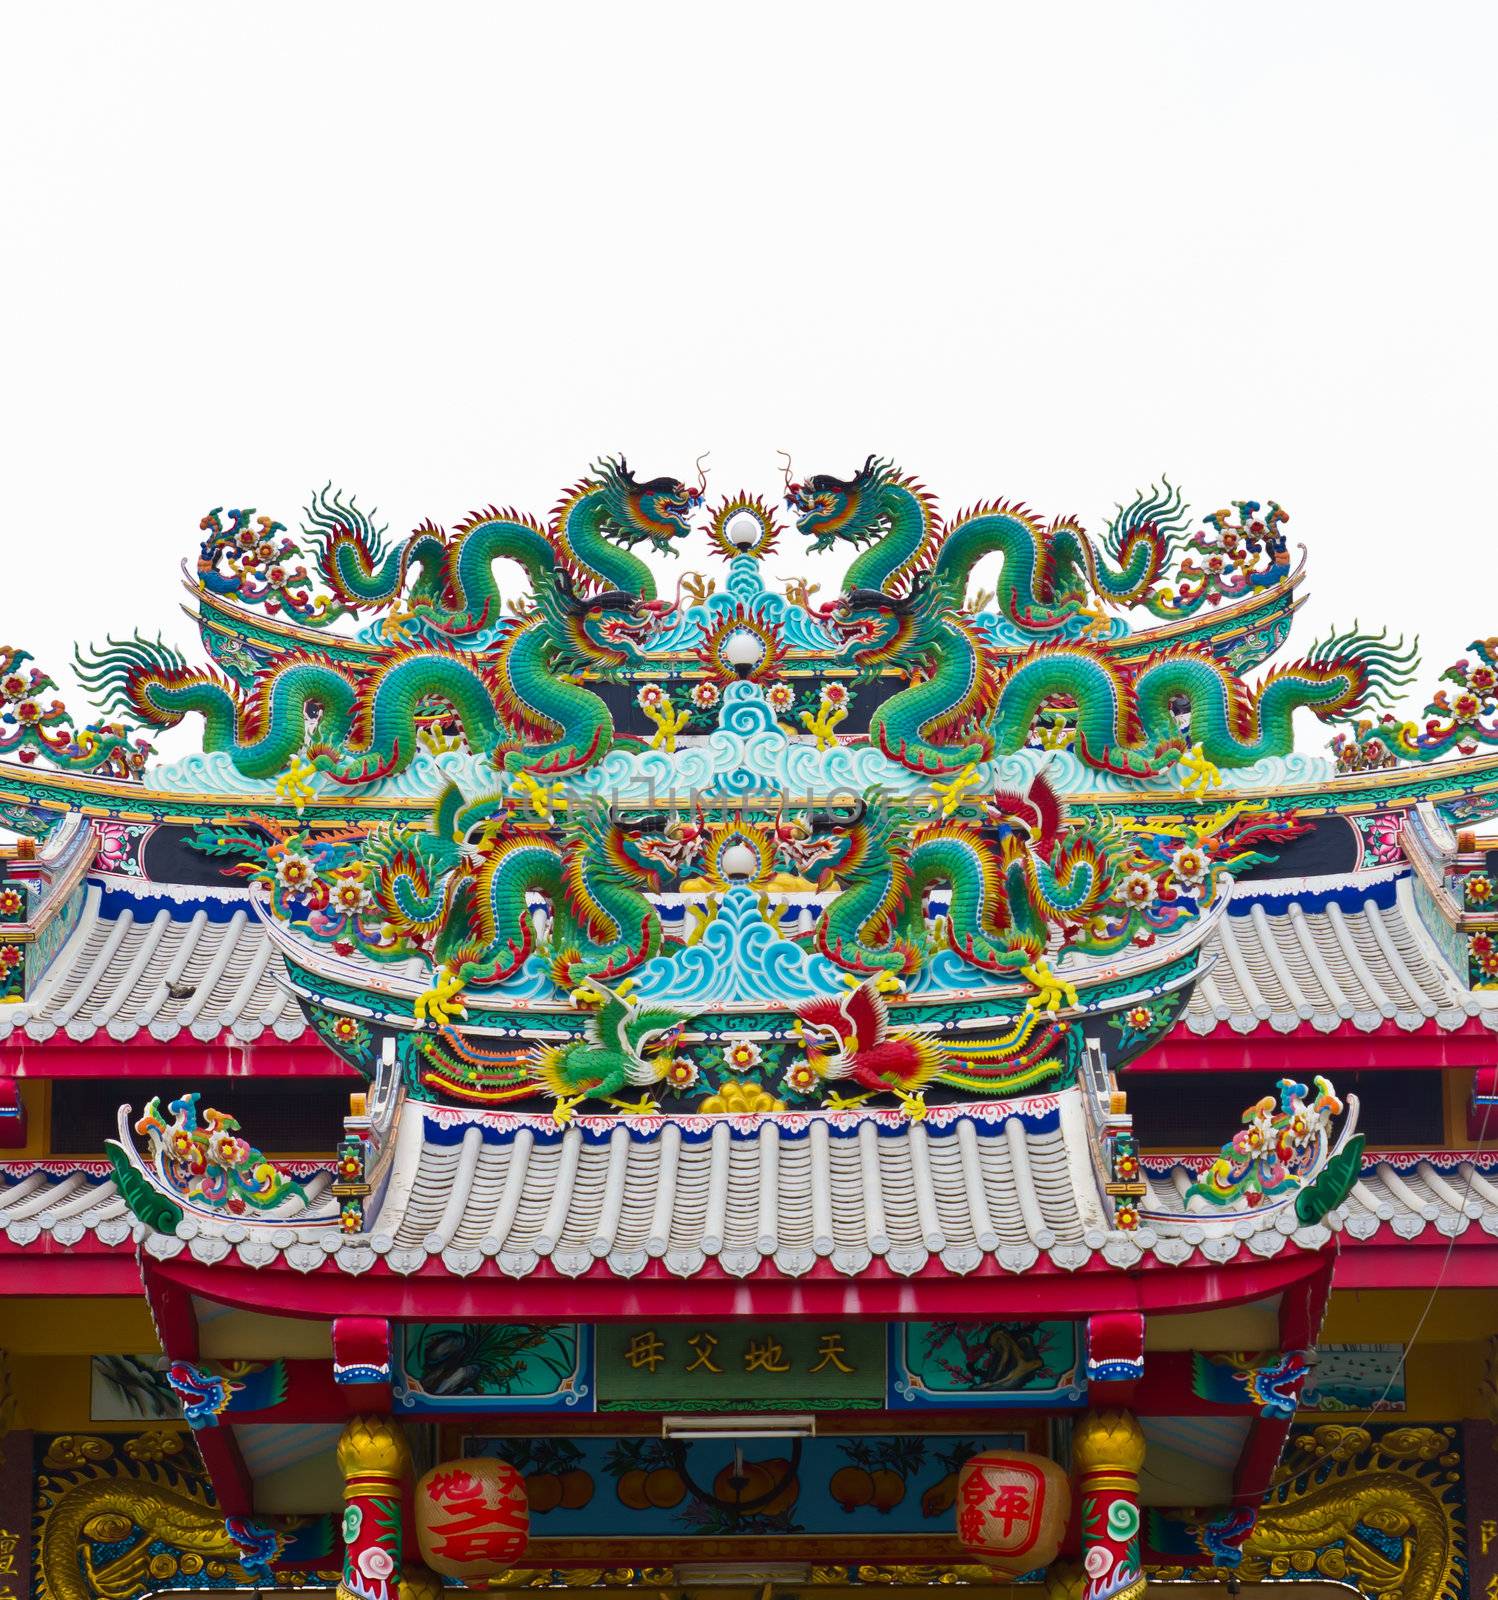 dragon statue on chinese temple roof by tungphoto